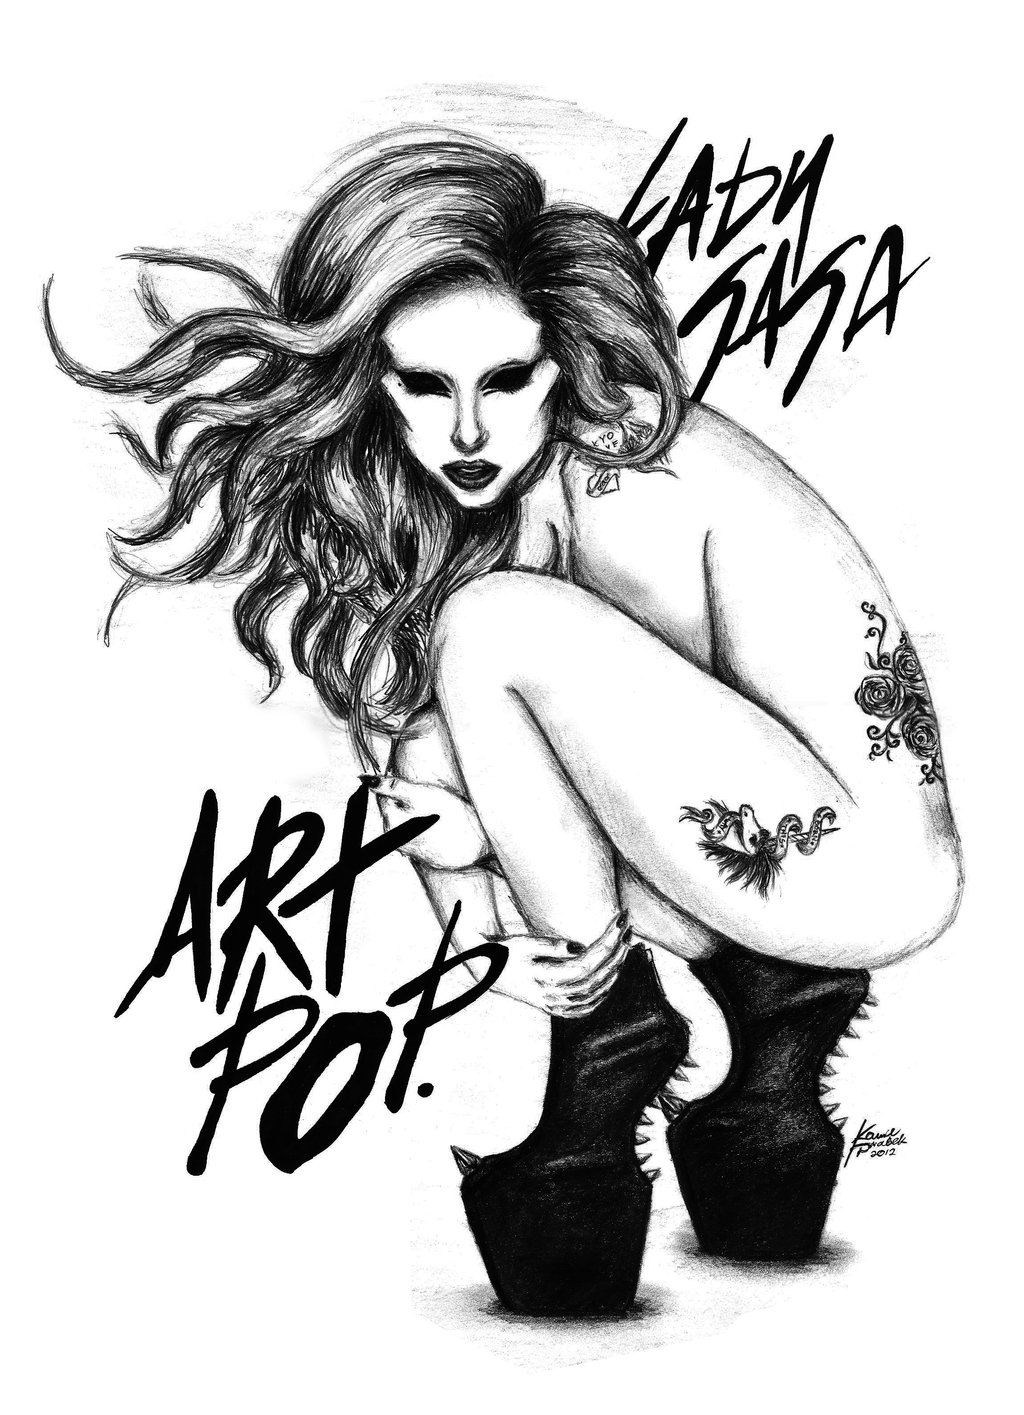  Lady Gaga Coloring Pages – best coloring page – Lady Gaga art pop, album